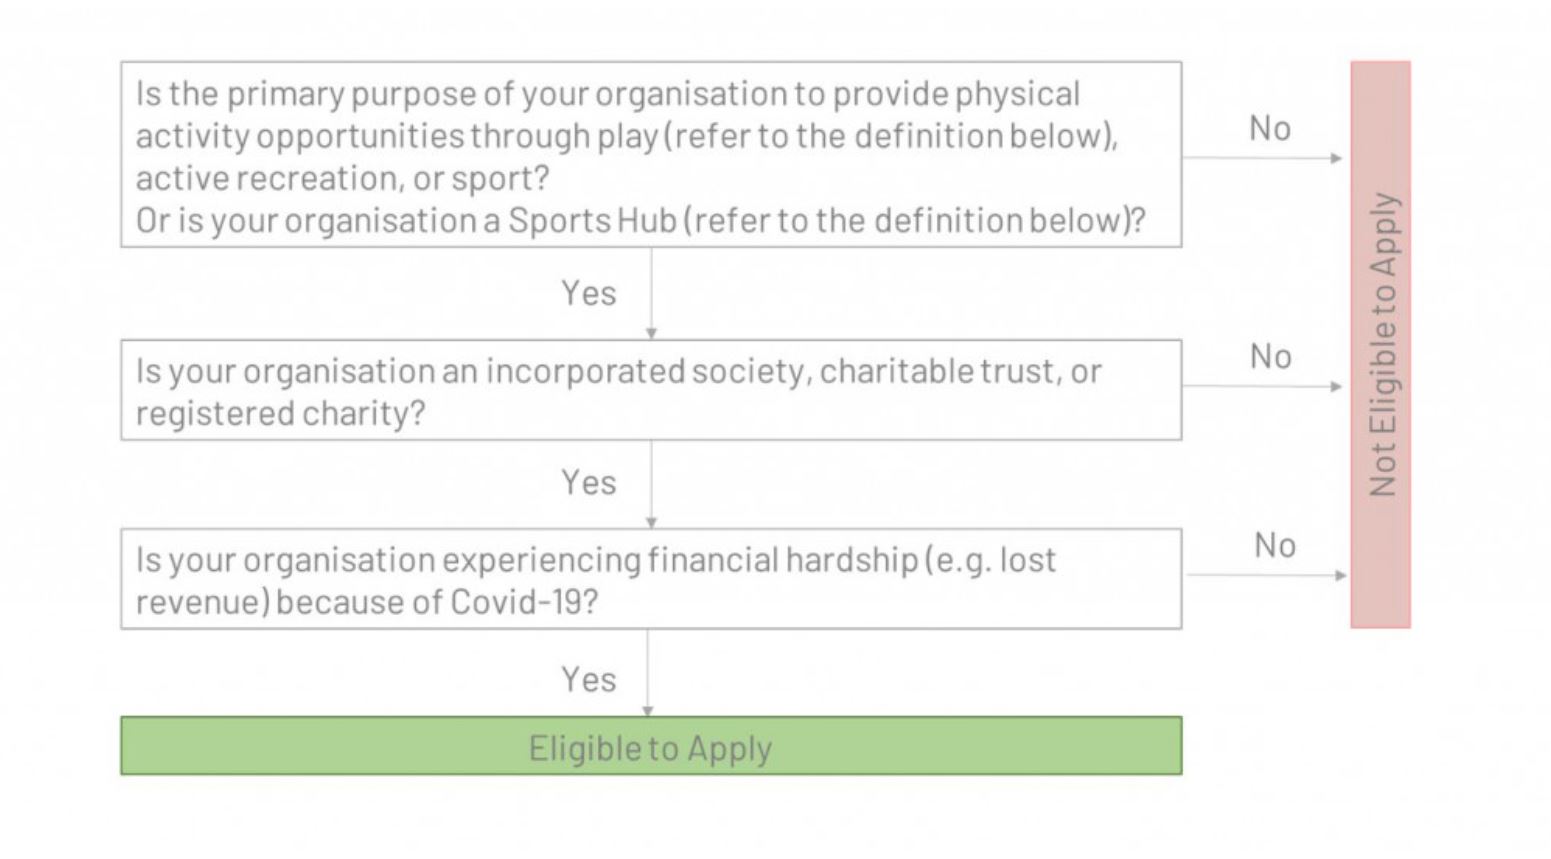 Flow chart showing if oranisations are eligible to apply